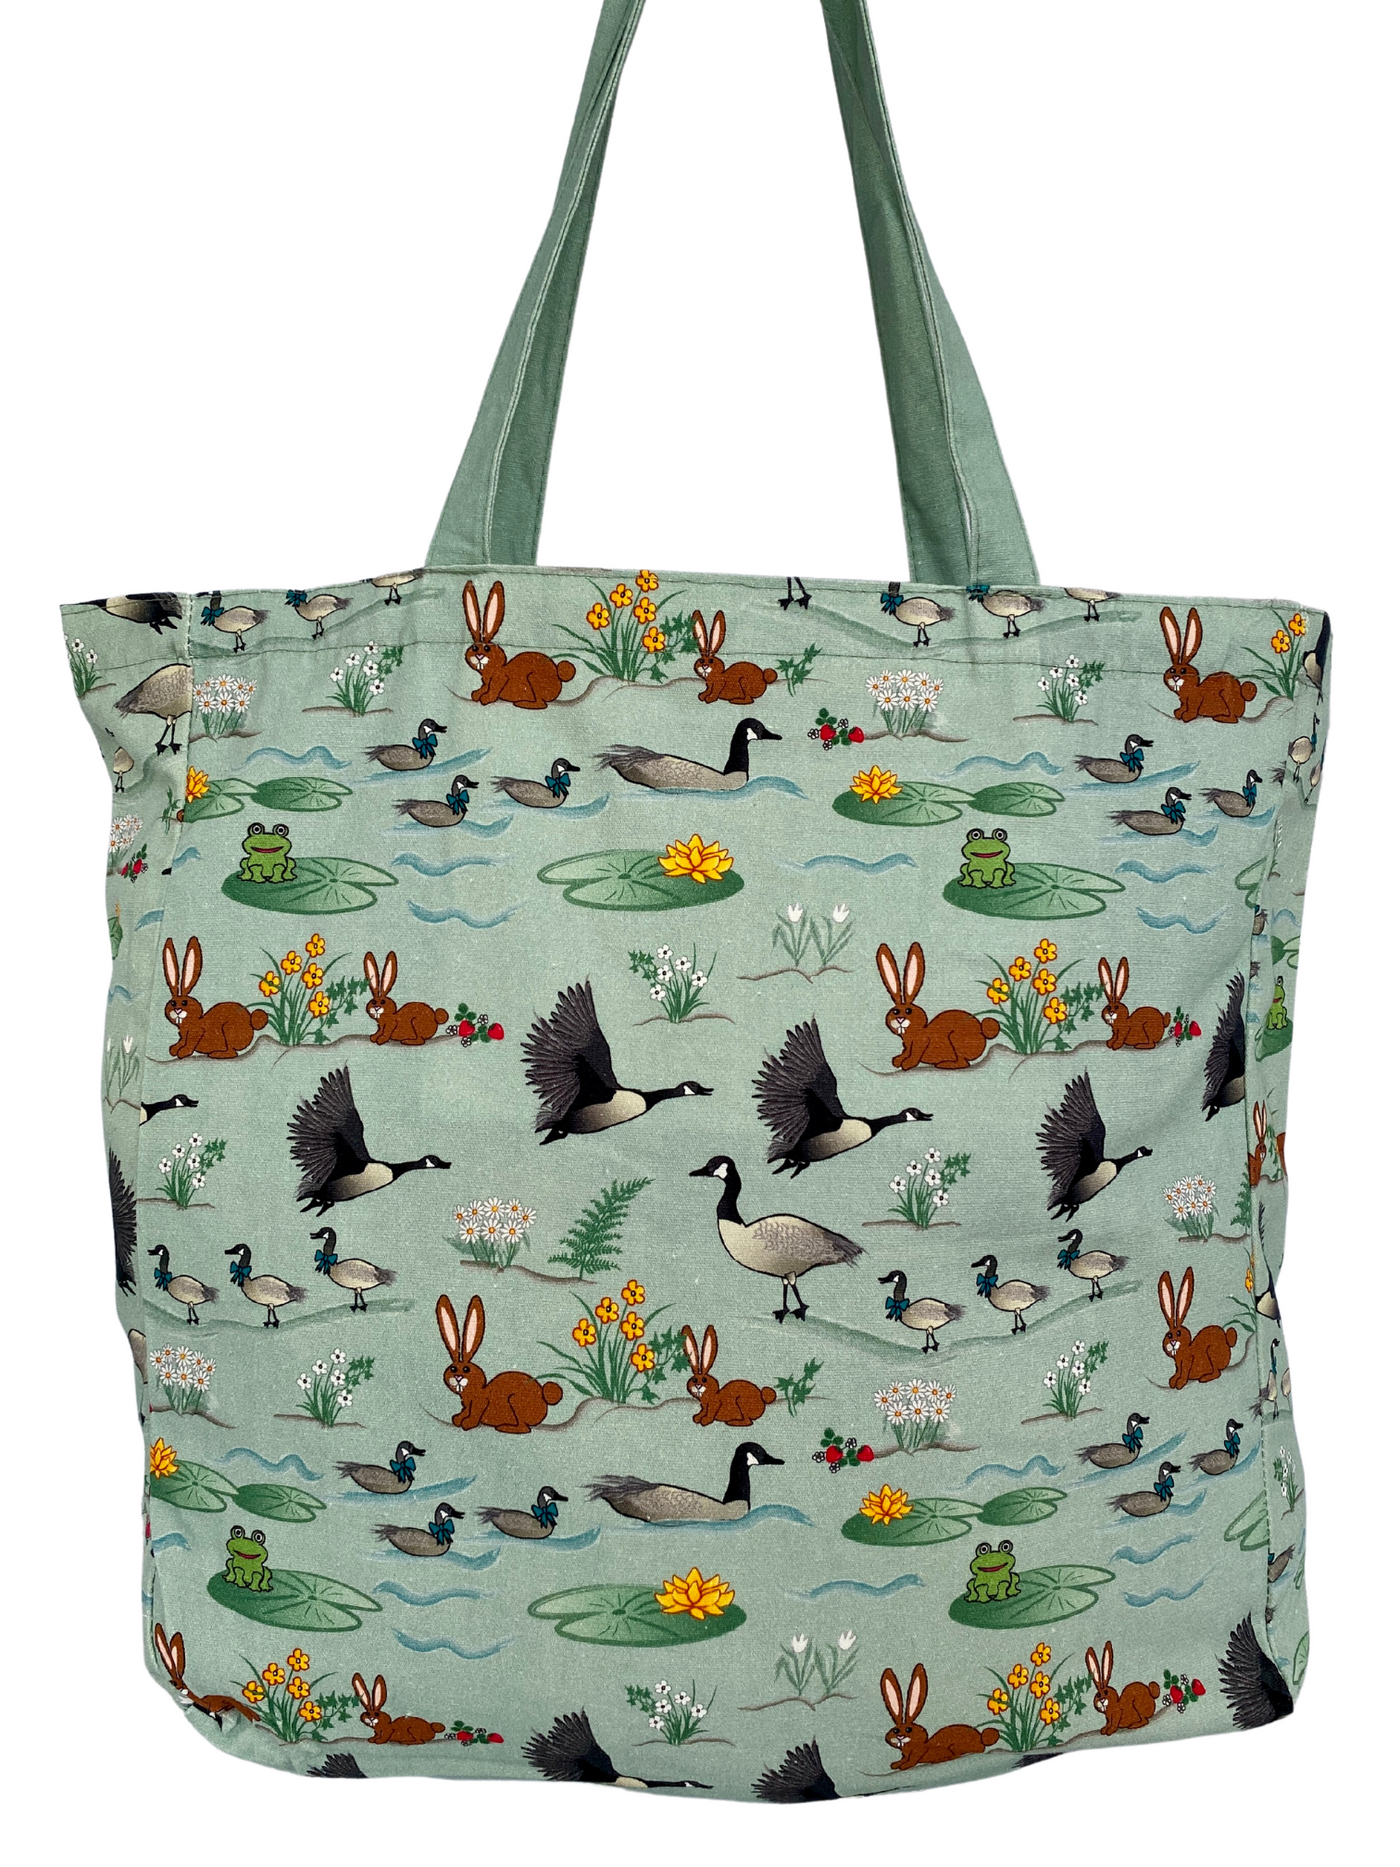 Illustrated Tote Bag: Canada Geese and Rabbits